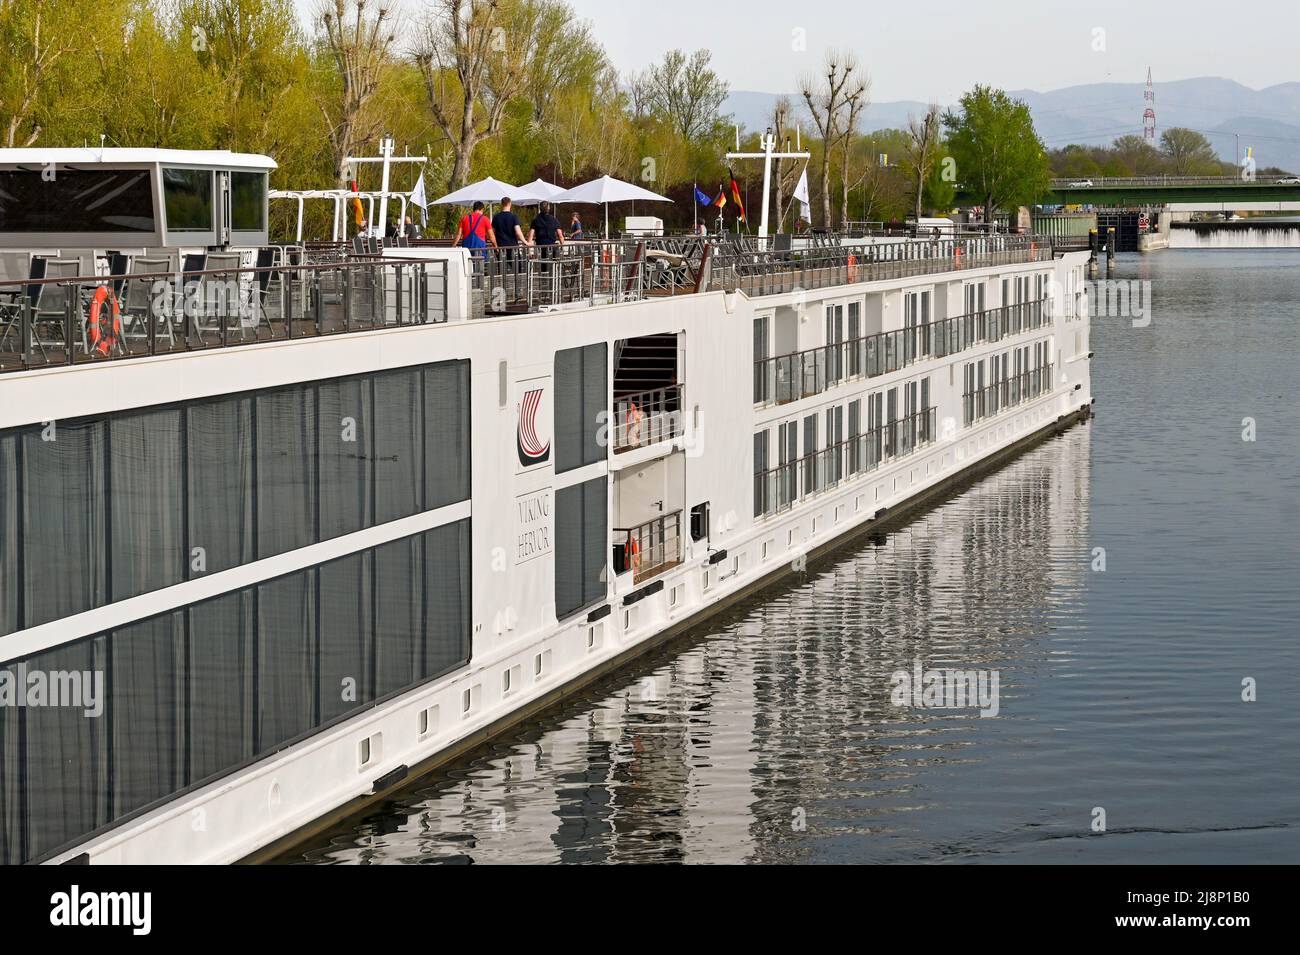 Breisach, Germany - April 2022: People on the top deck of a Viking river cruise ship moored in Breisach. Stock Photo